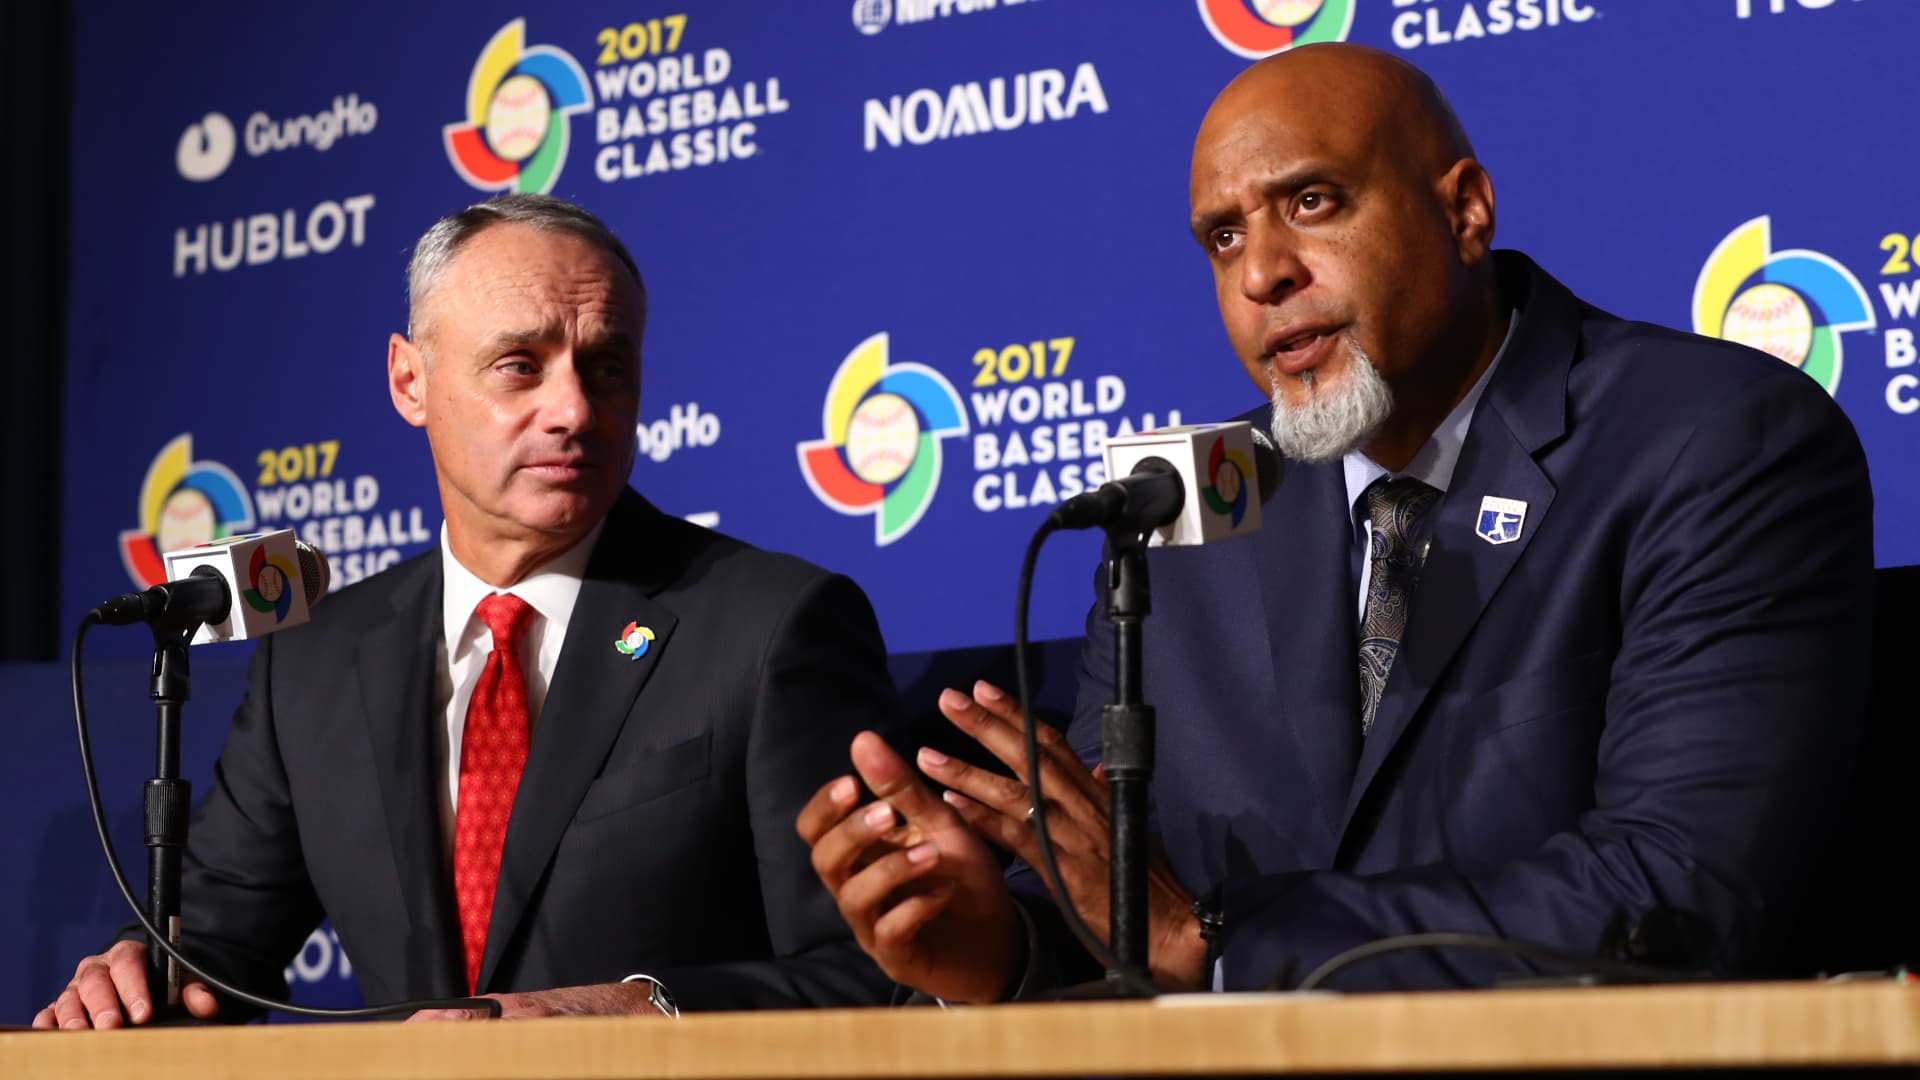 Major League Baseball Commissioner Robert D. Manfred Jr. and Major League Baseball Players Association Executive Director Tony Clark speak during a press conference before Game 3 of the Championship Round of the 2017 World Baseball Classic between Team USA and Team Puerto Rico on Wednesday, March 22, 2017 at Dodger Stadium in Los Angeles, California.